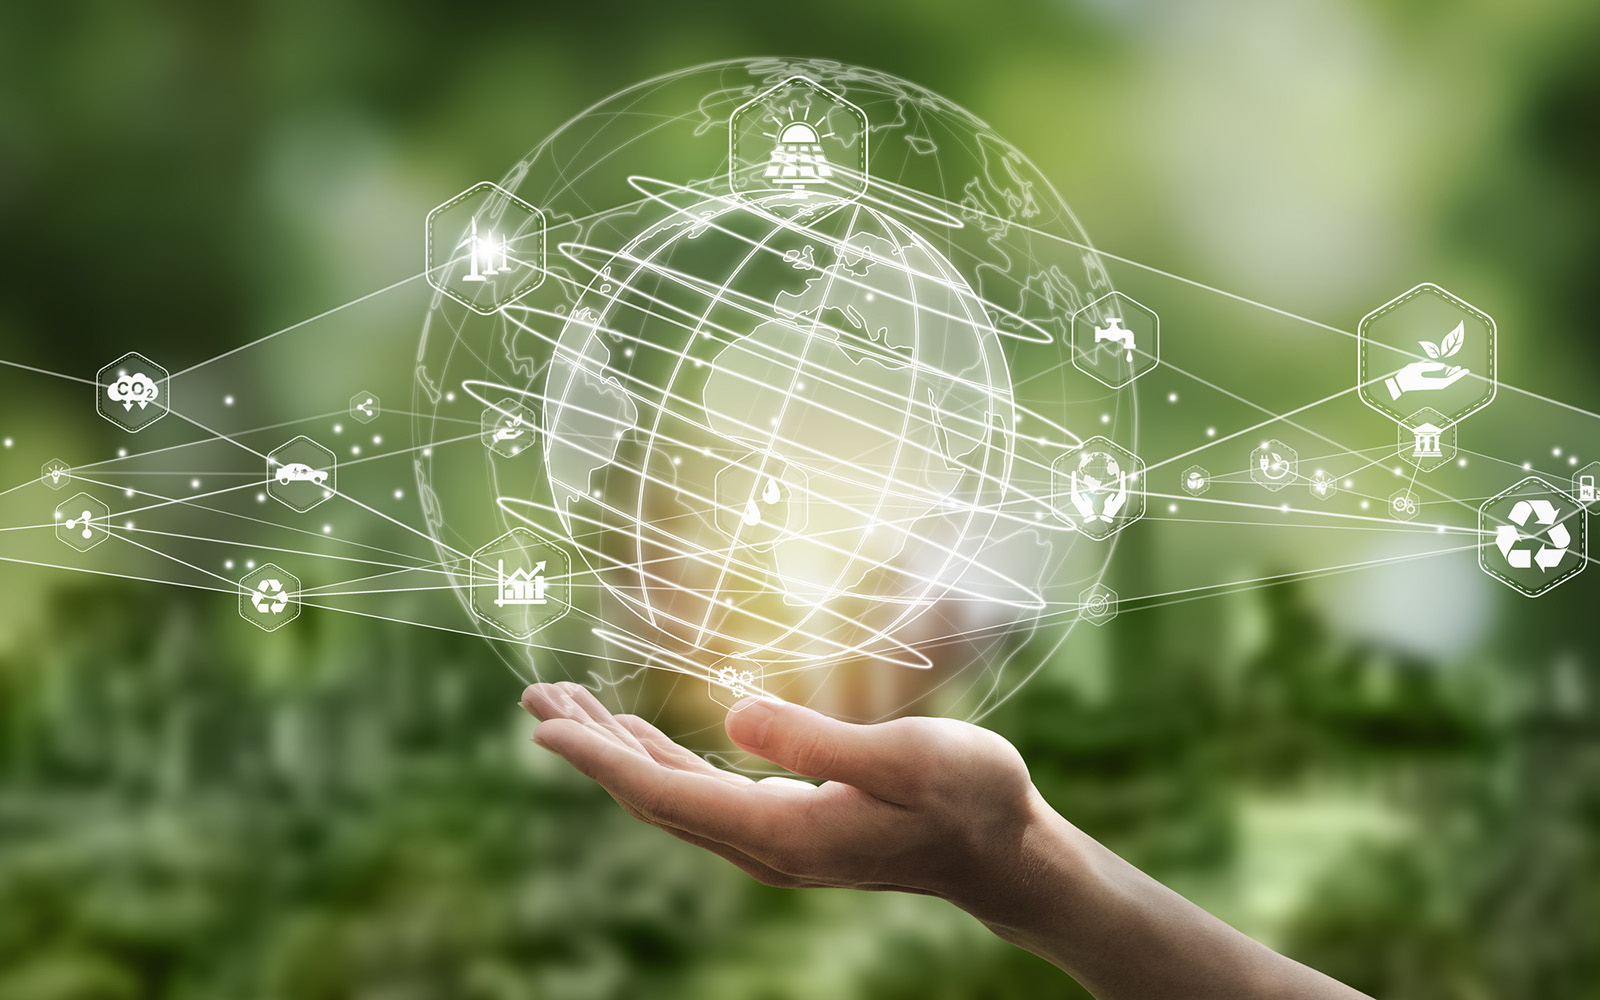 Digitized white globe graphic resting on an outstretched hand with blurry green background